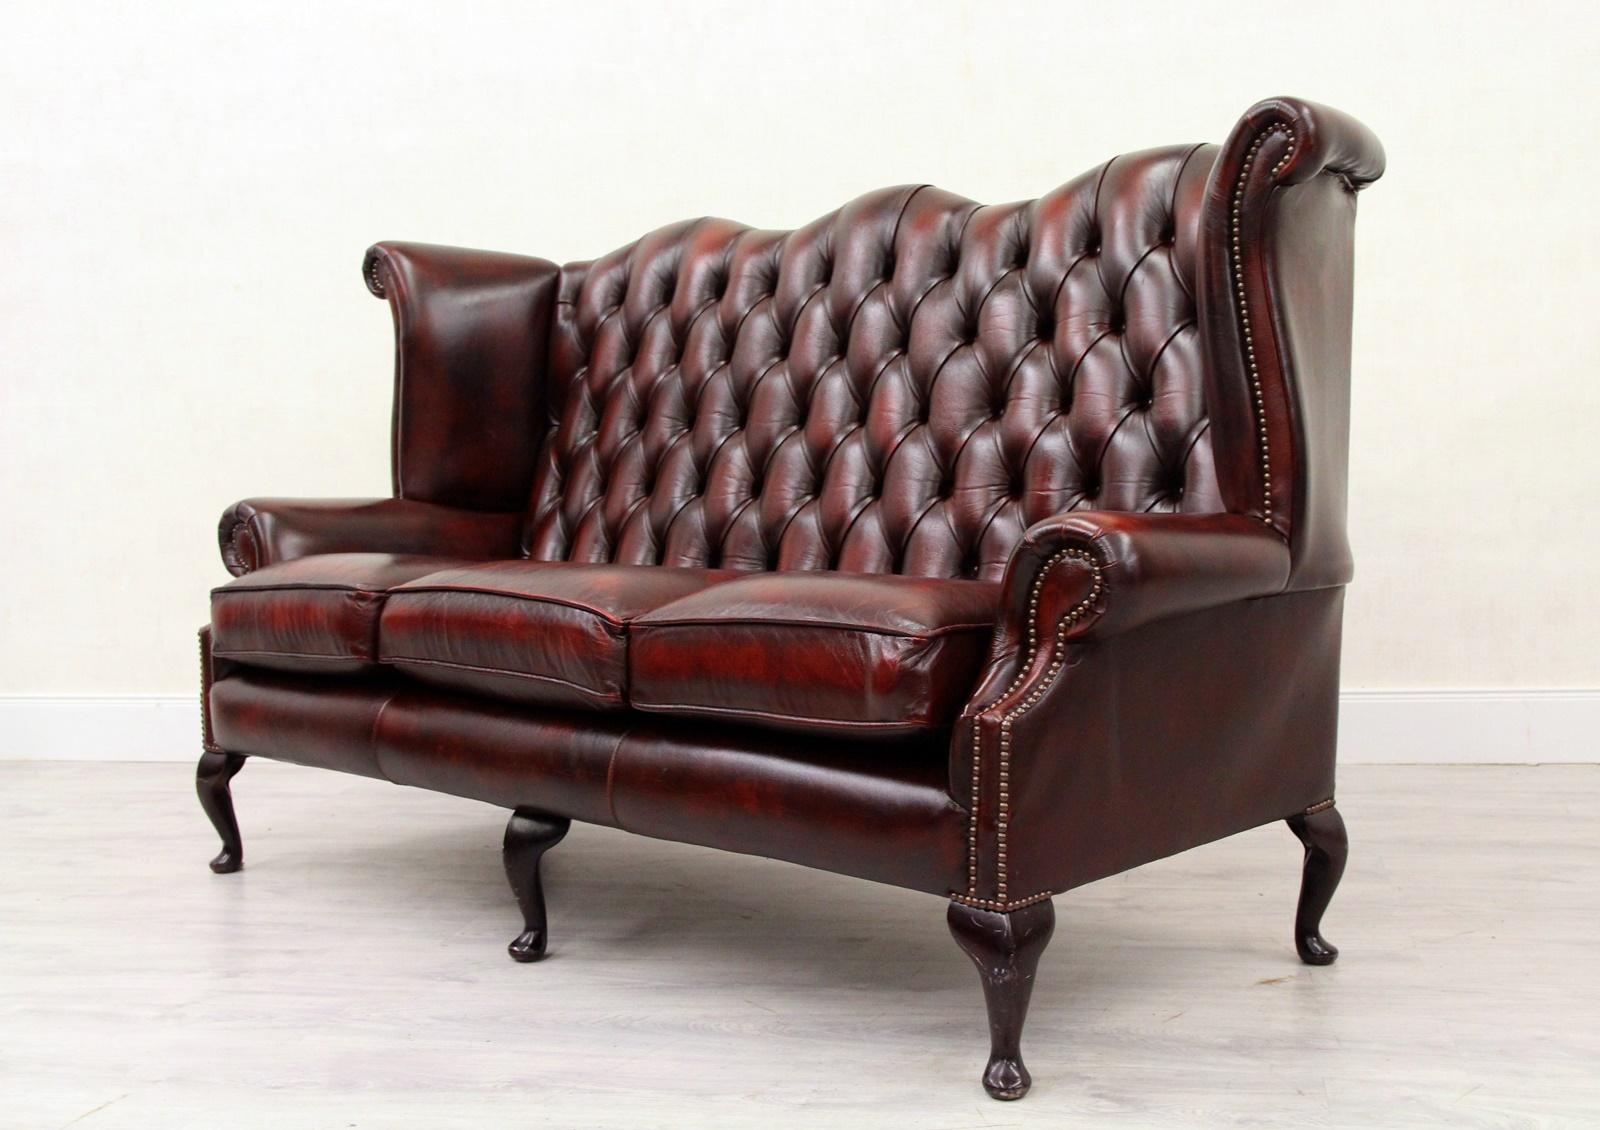 Chesterfield Sofa Armchair Leather Antique Wing Chair TV Armchair For Sale 2